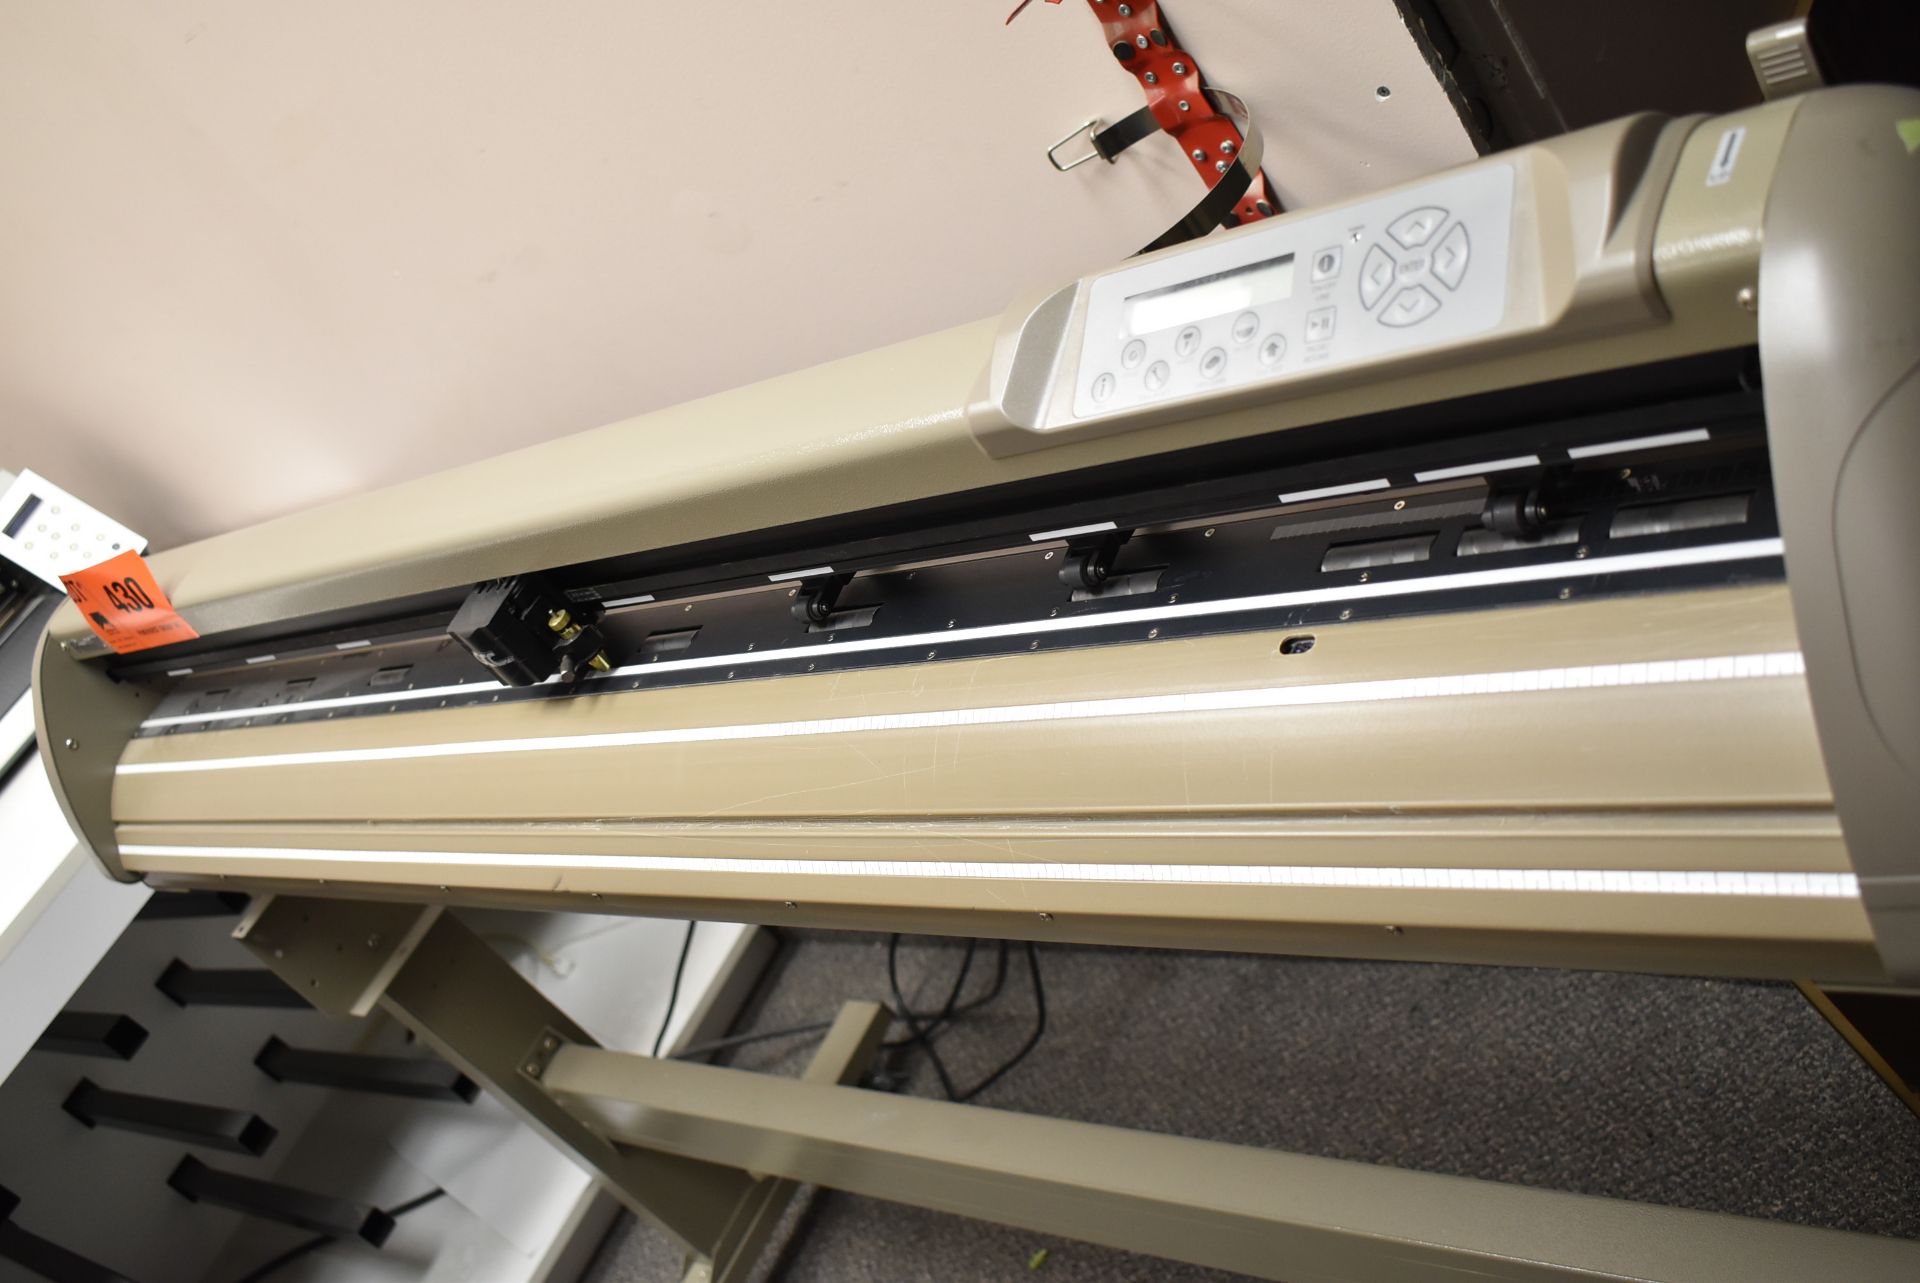 GCC PUMA III VINYL CUTTER [RIGGING FEES FOR LOT #430 - $25 USD PLUS APPLICABLE TAXES] - Image 2 of 3